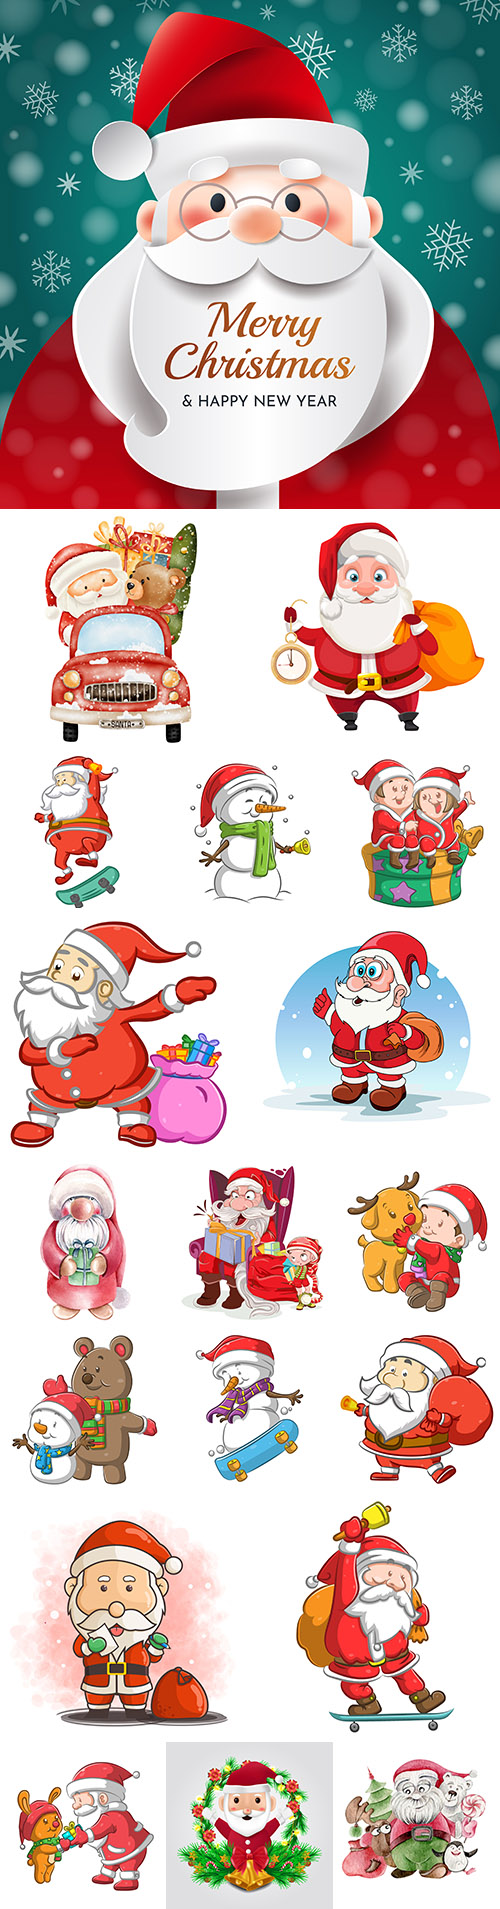 Santa Claus funny character with Christmas gift illustrations collection
